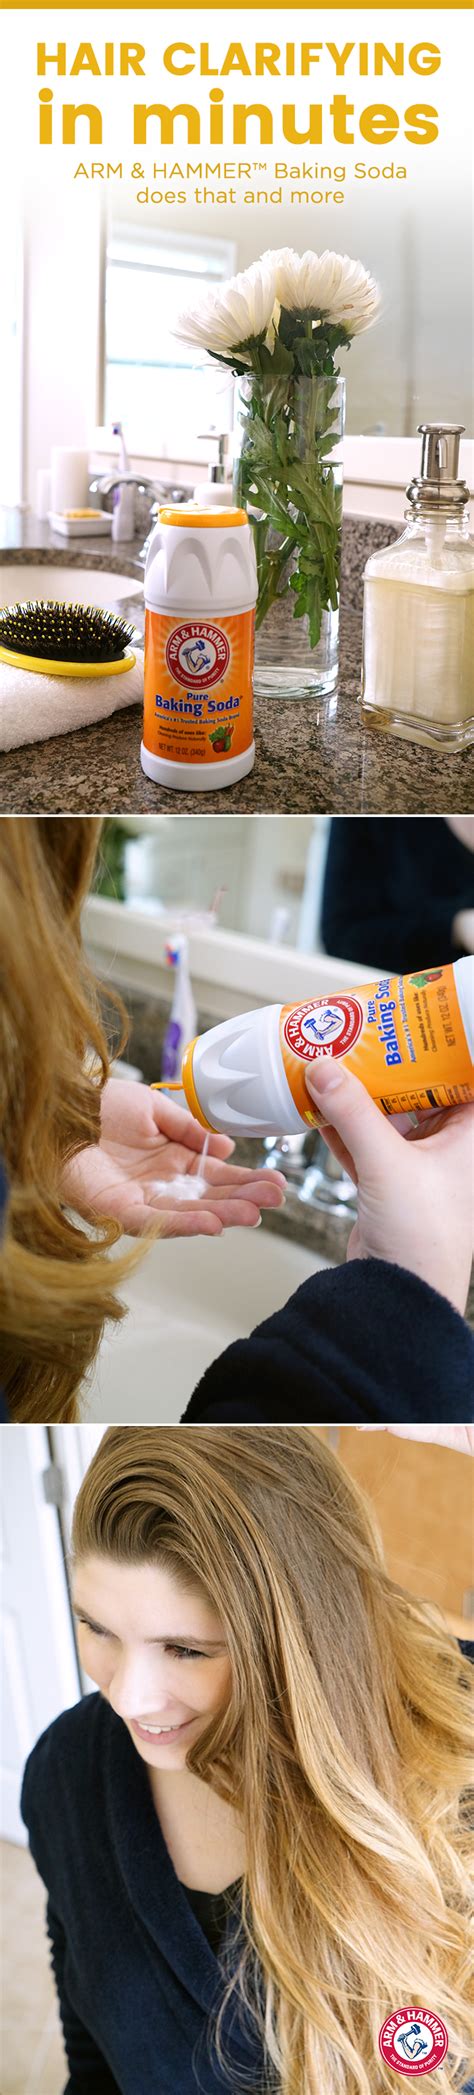 They use a process called 'velveting' to tenderize the meat before they cook it in their stir fry dishes. HAIR CLARIFYING IN MINUTES With ARM & HAMMER™ Baking Soda ...